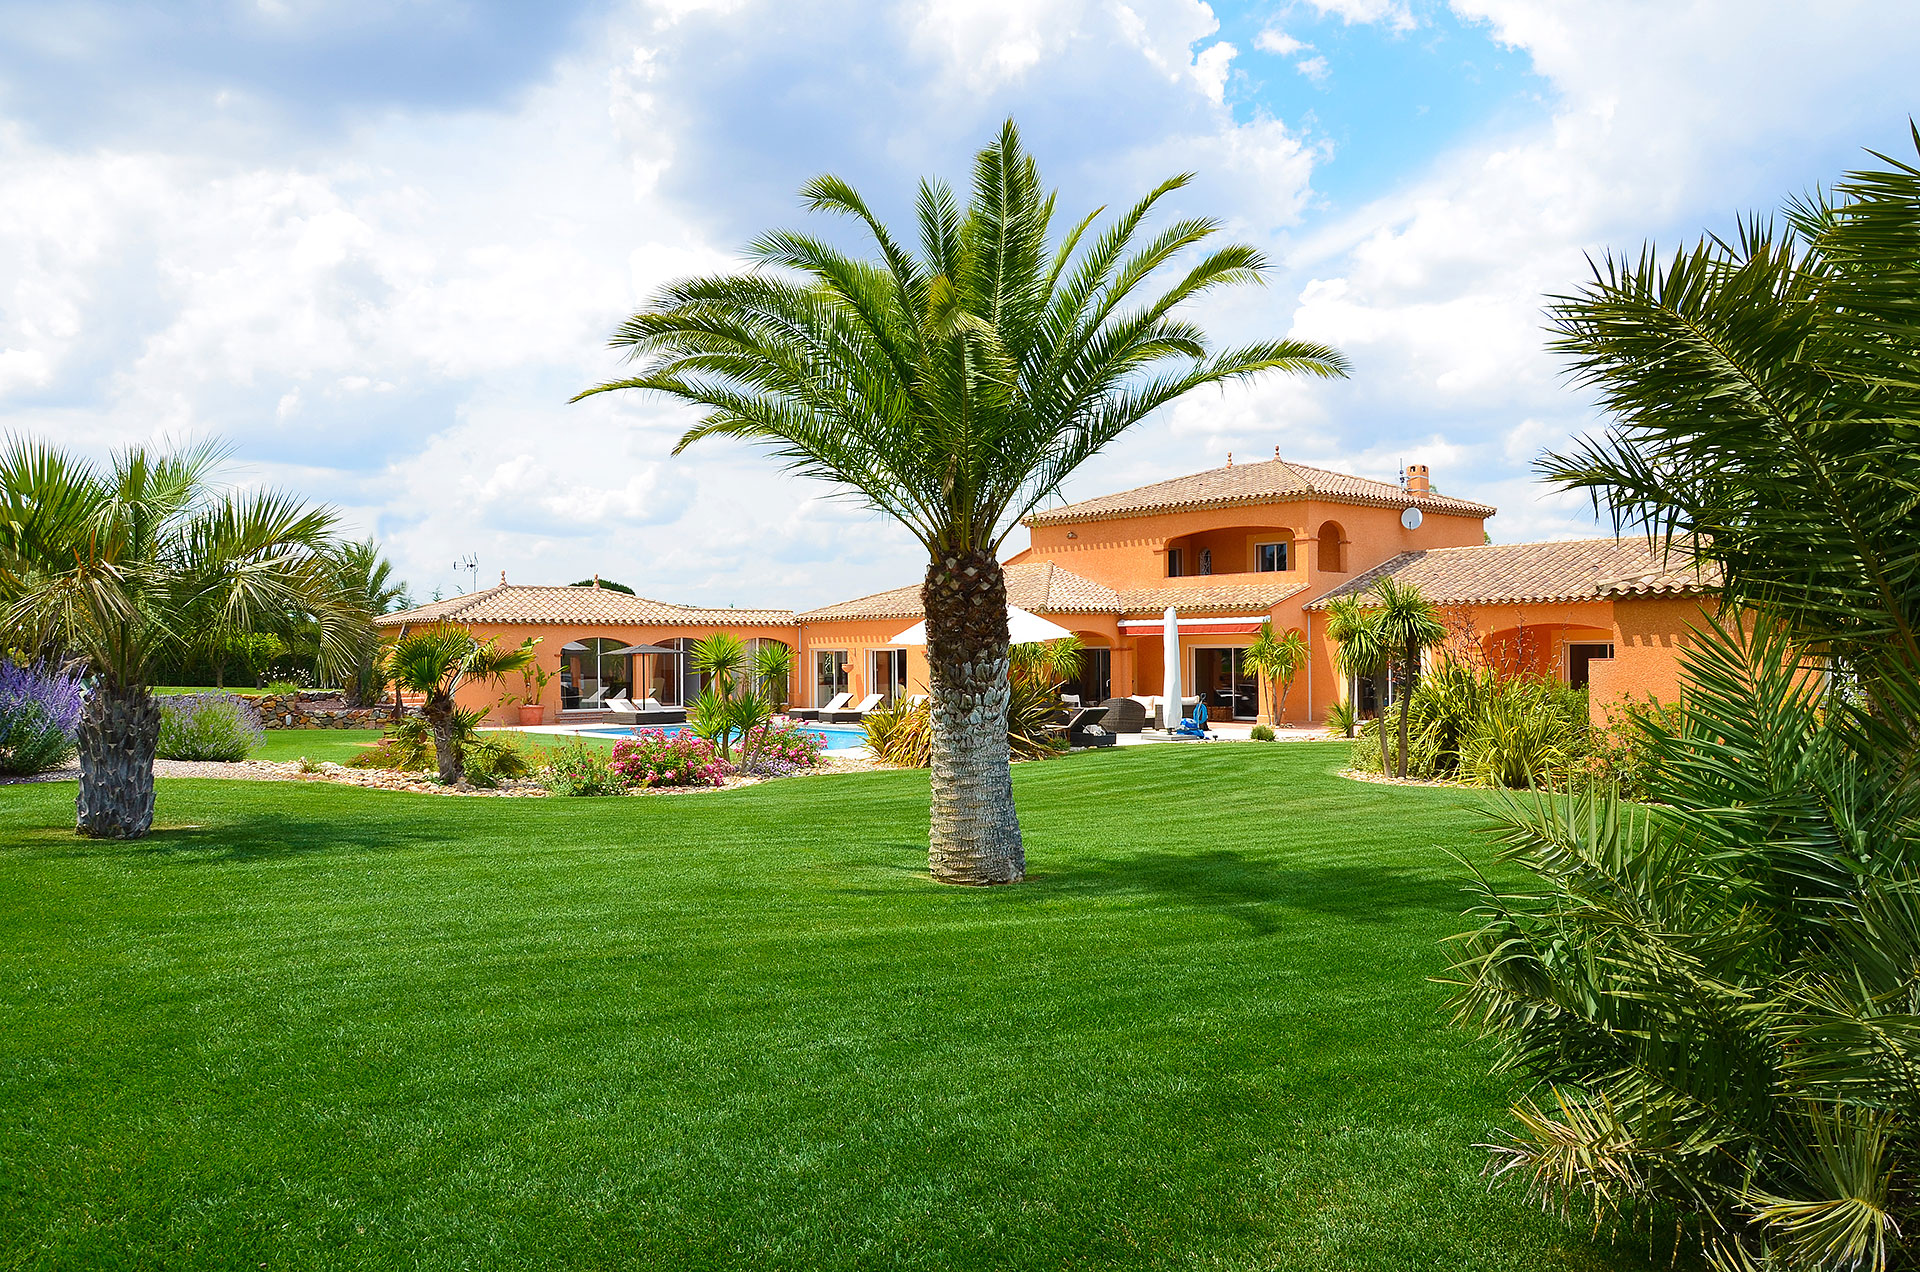 Luxury Neo-Provencal Villa For Sale In Perpignan, France | Exclusivity Finest International | FINEST RESIDENCES